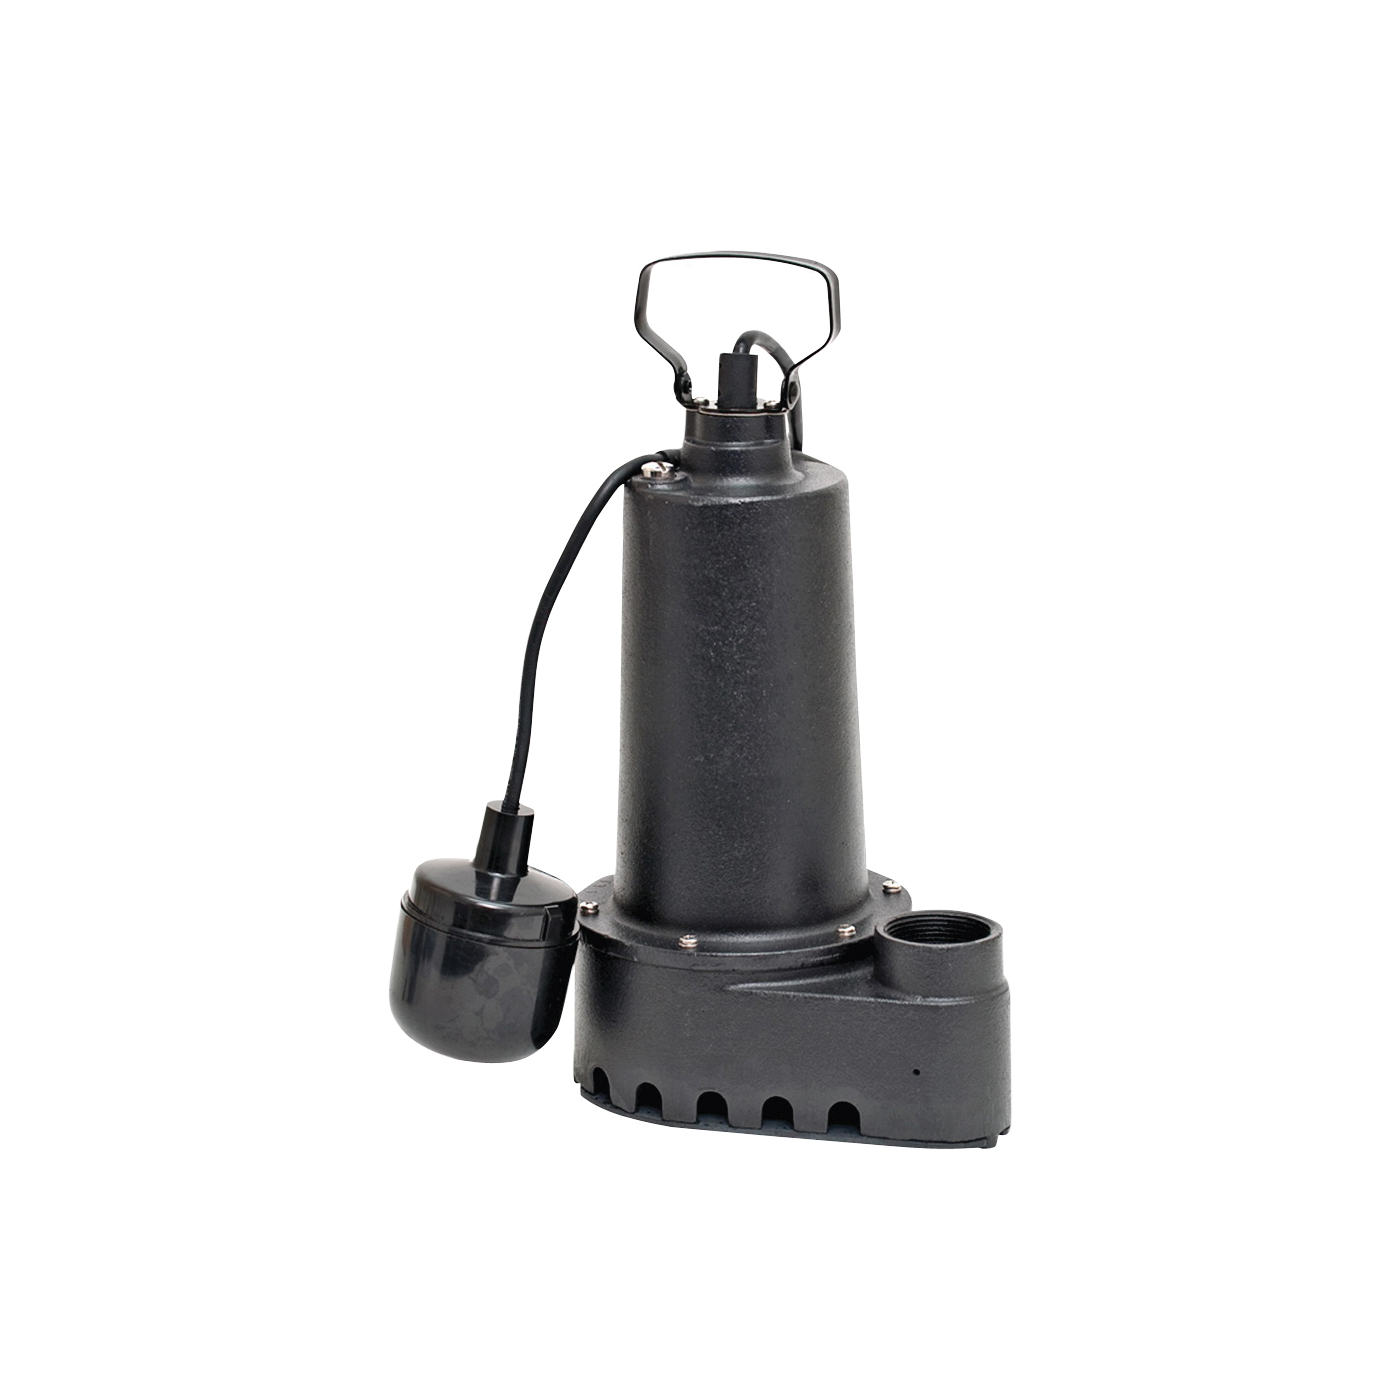 92501 Sump Pump, 7.6 A, 120 V, 0.5 hp, 1-1/2 in Outlet, 70 gpm, Iron